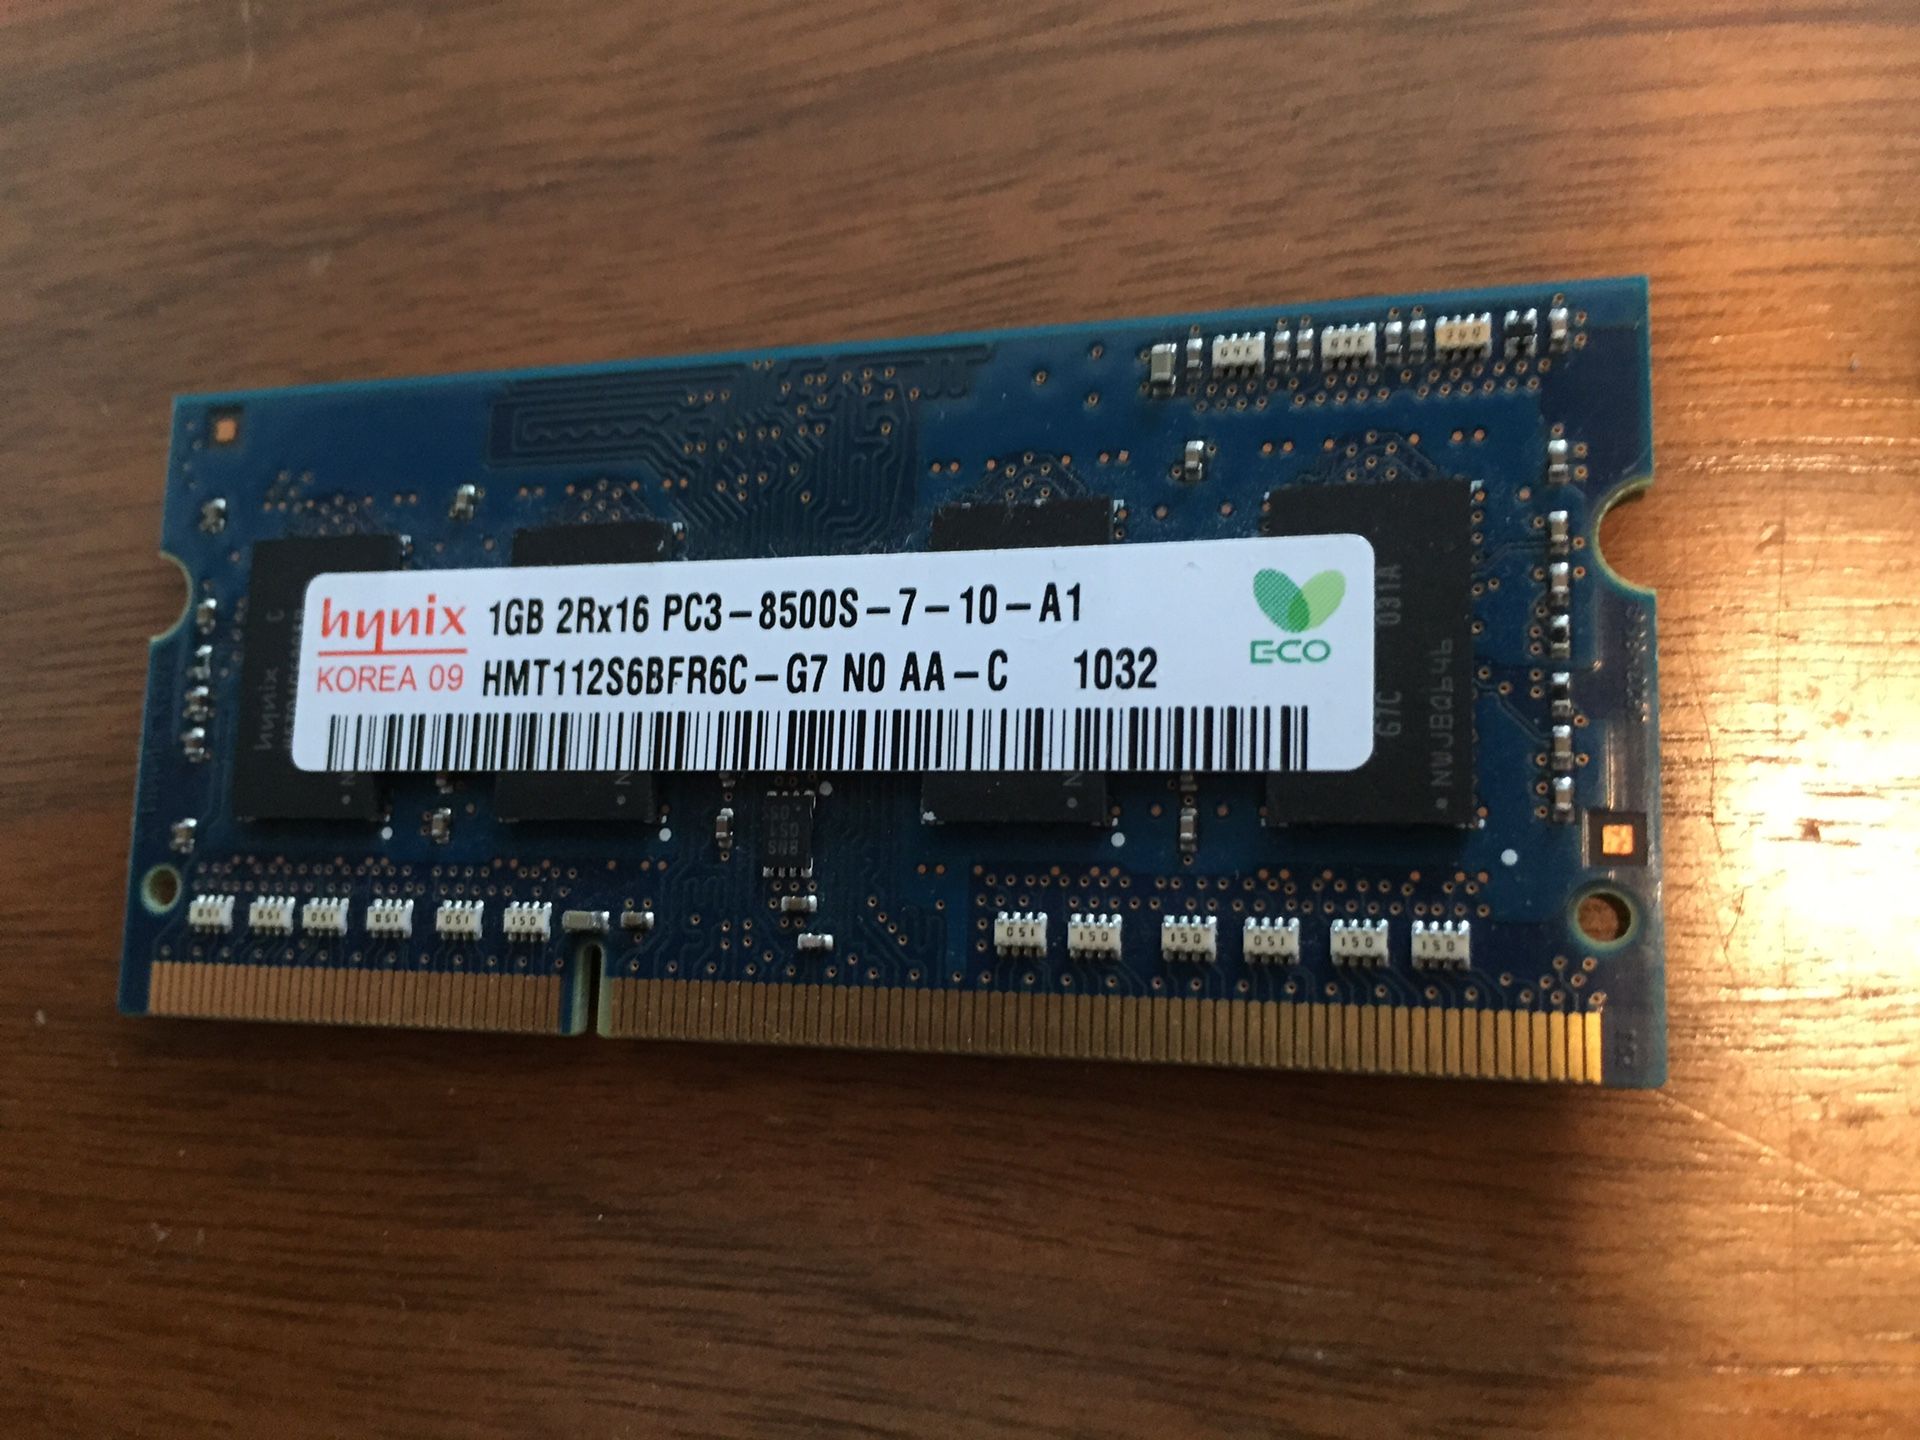 1gb and 256mb laptop ram cards